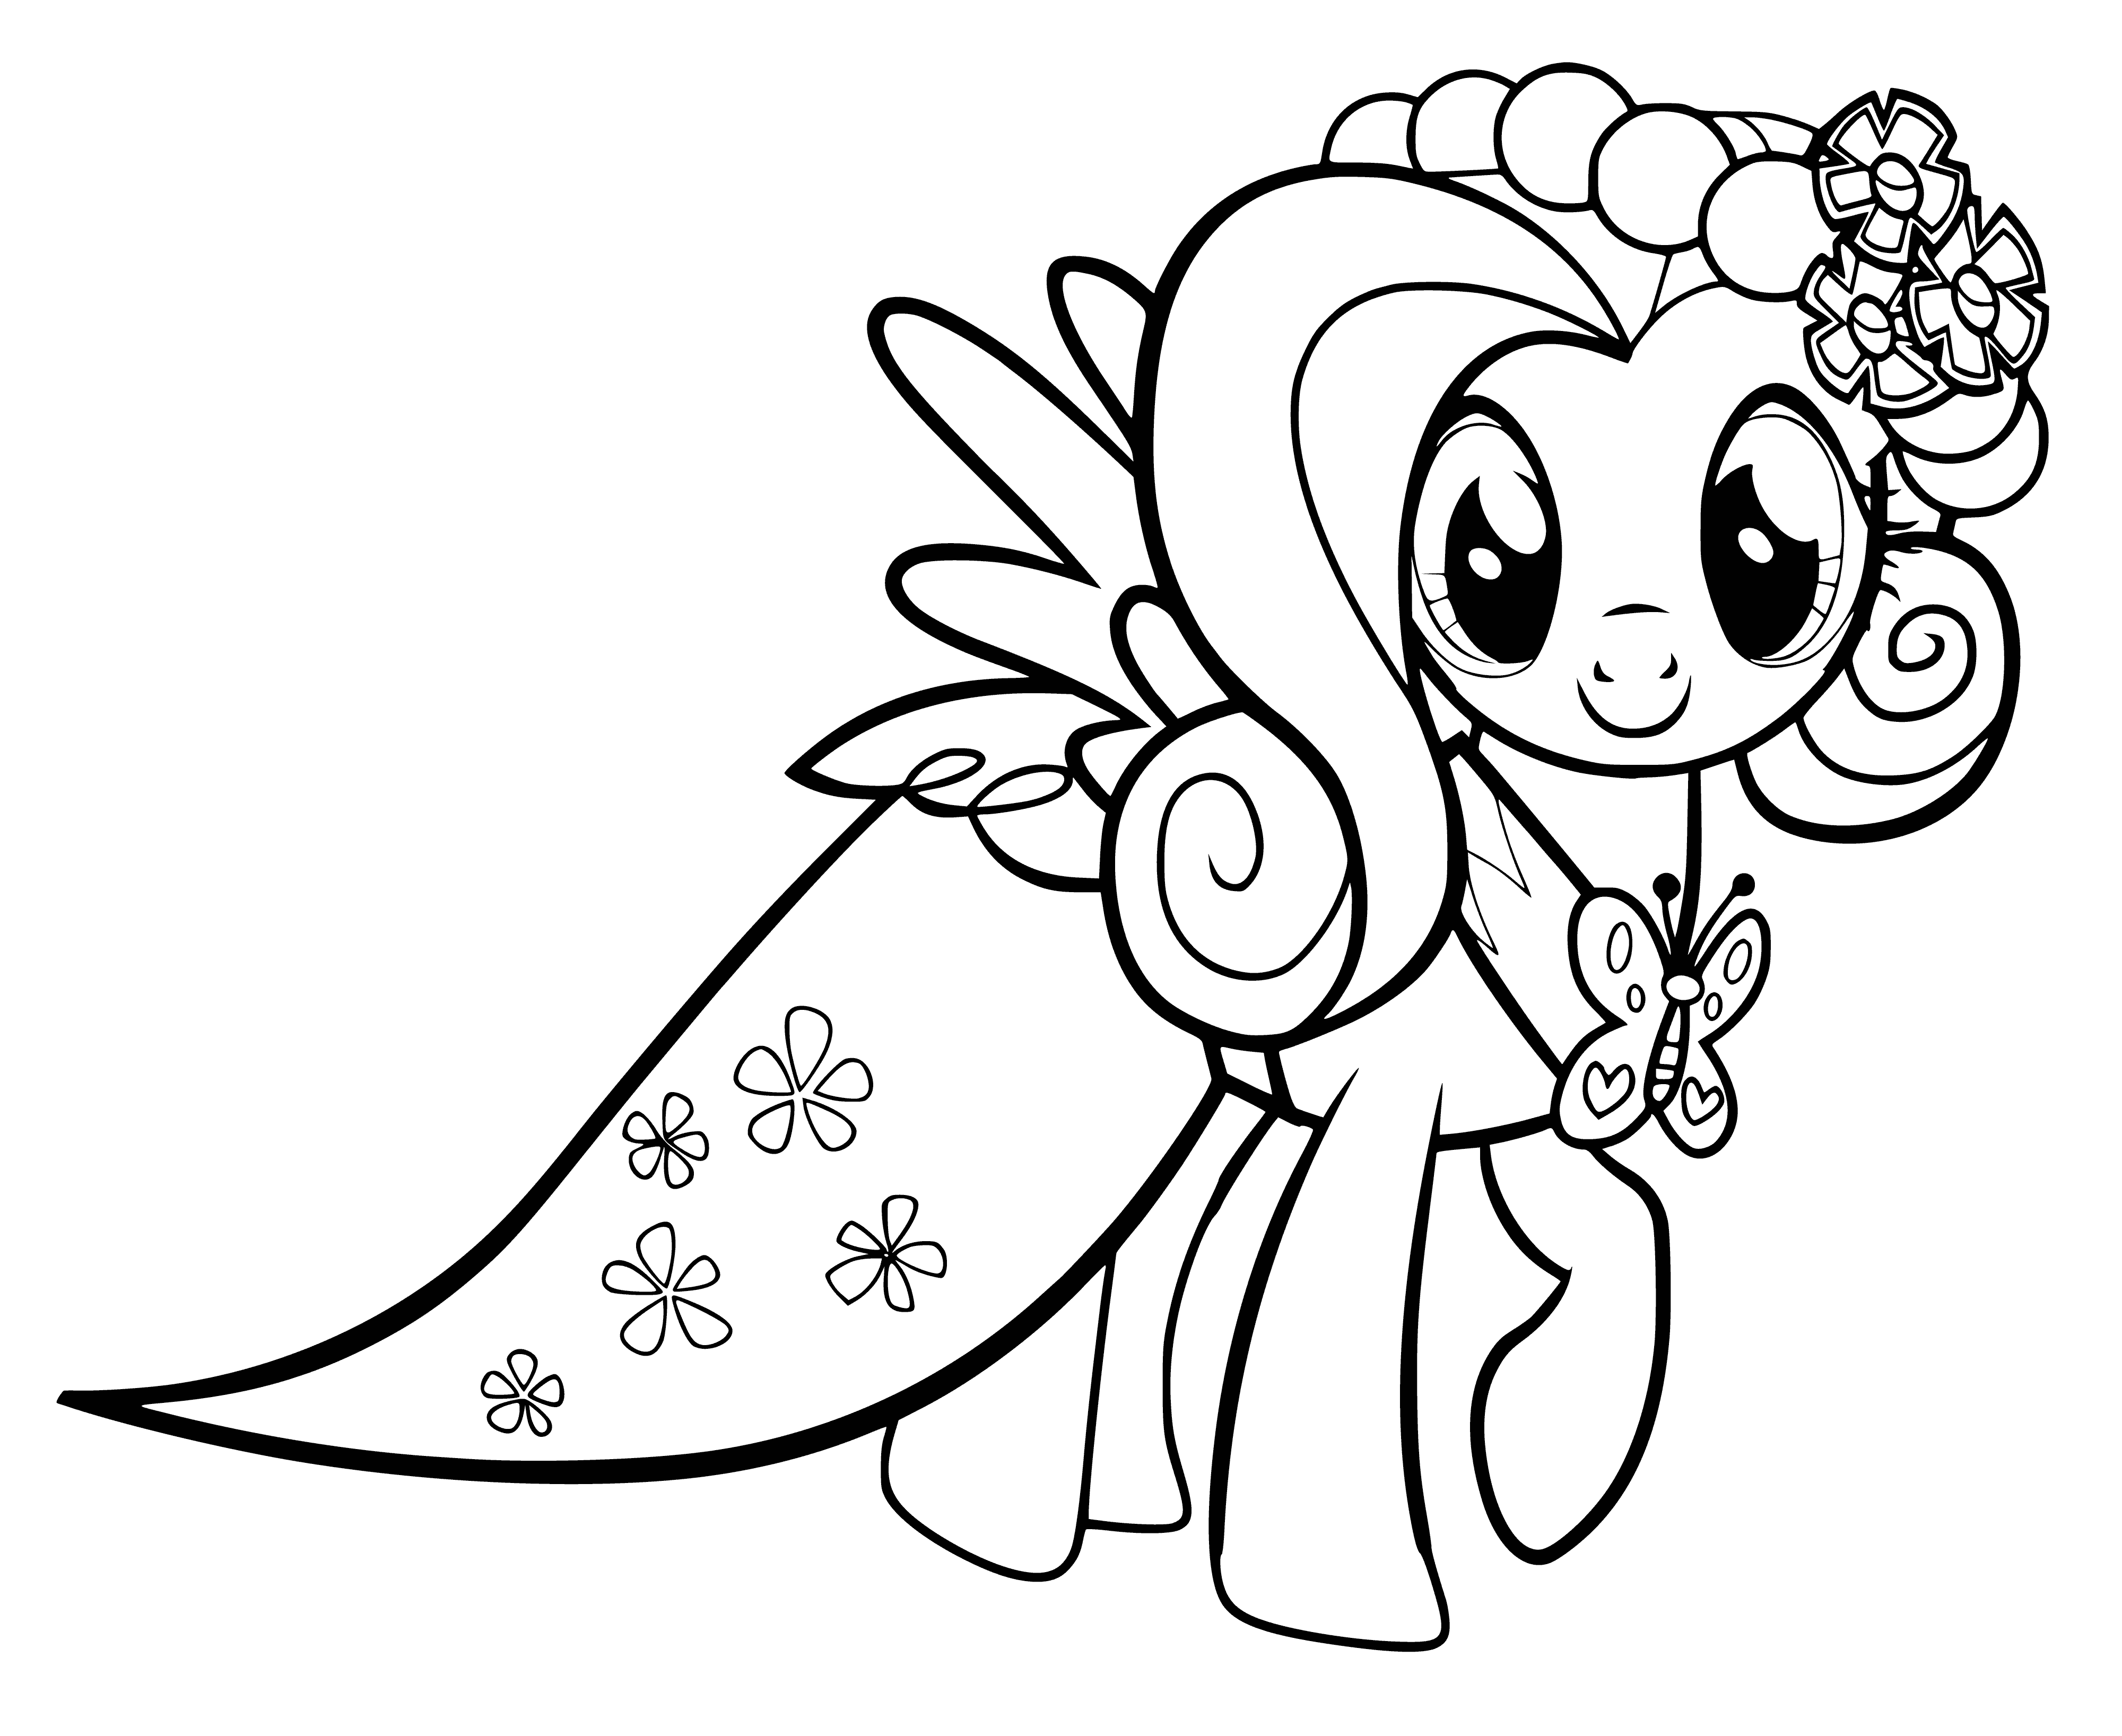 coloring page: Cheerful yellow Pegasus pony stands on a green hill with a bright sun and fluffy clouds. Big blue eyes, a small nose, and a light purple and pink mane and tail. Wings tipped in pink.